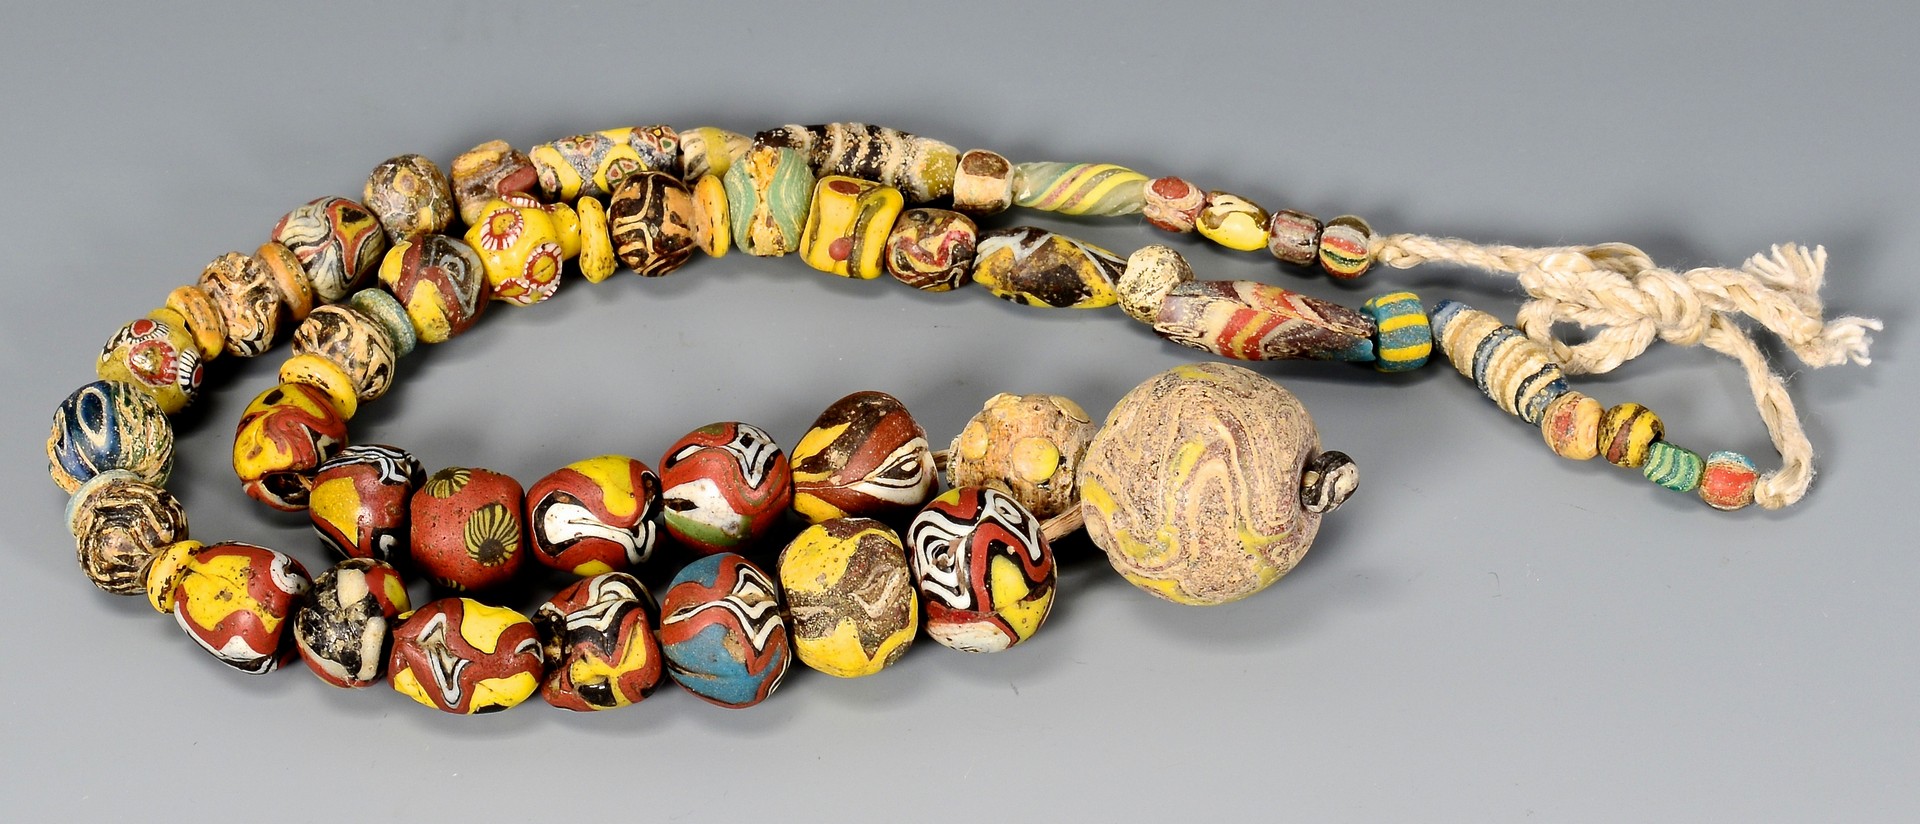 Lot 598: Near Eastern Mosaic Glass Bead Necklace